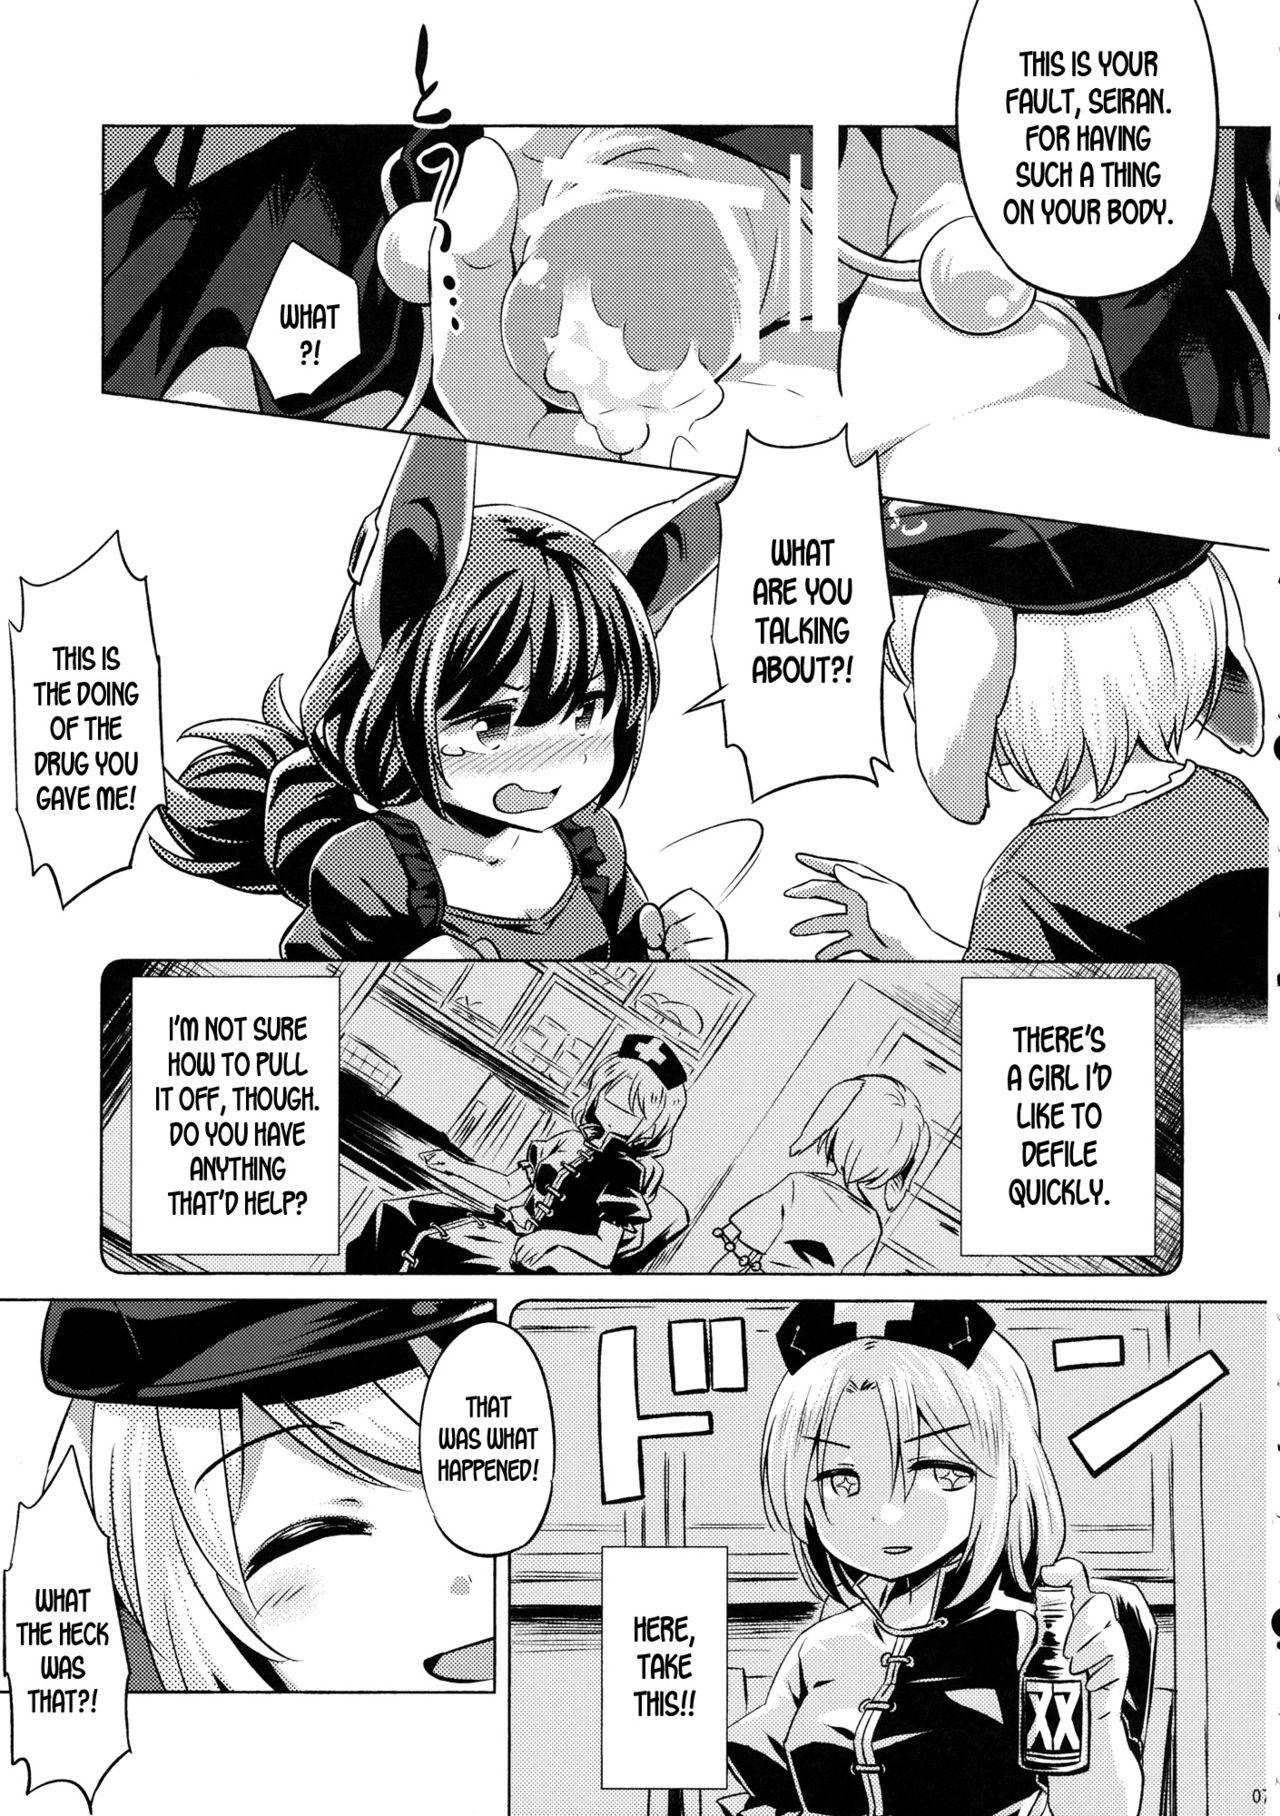 Caliente Speed Strike Seiran - Touhou project Free Amatuer Porn - Page 6